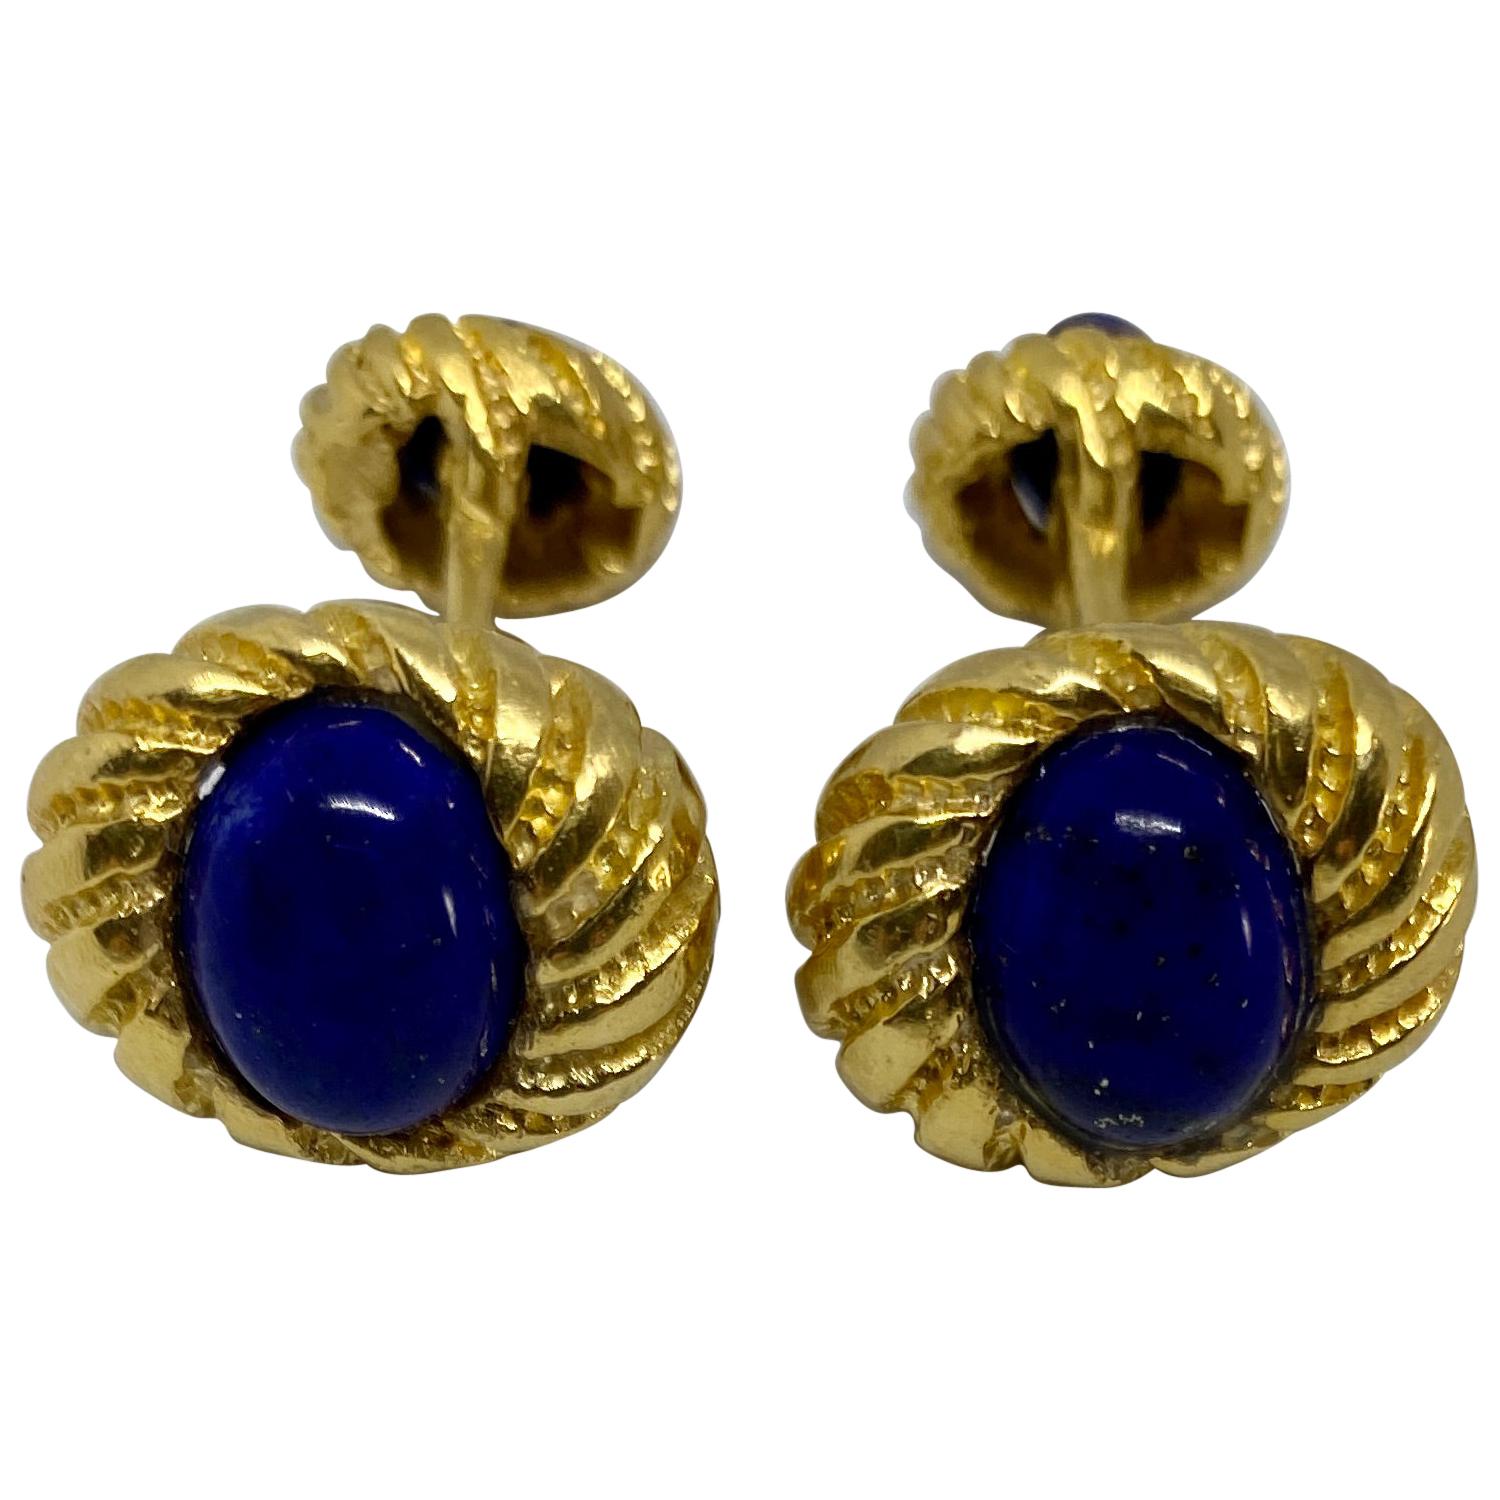 Vintage 18k Yellow Gold and Lapis Cufflinks